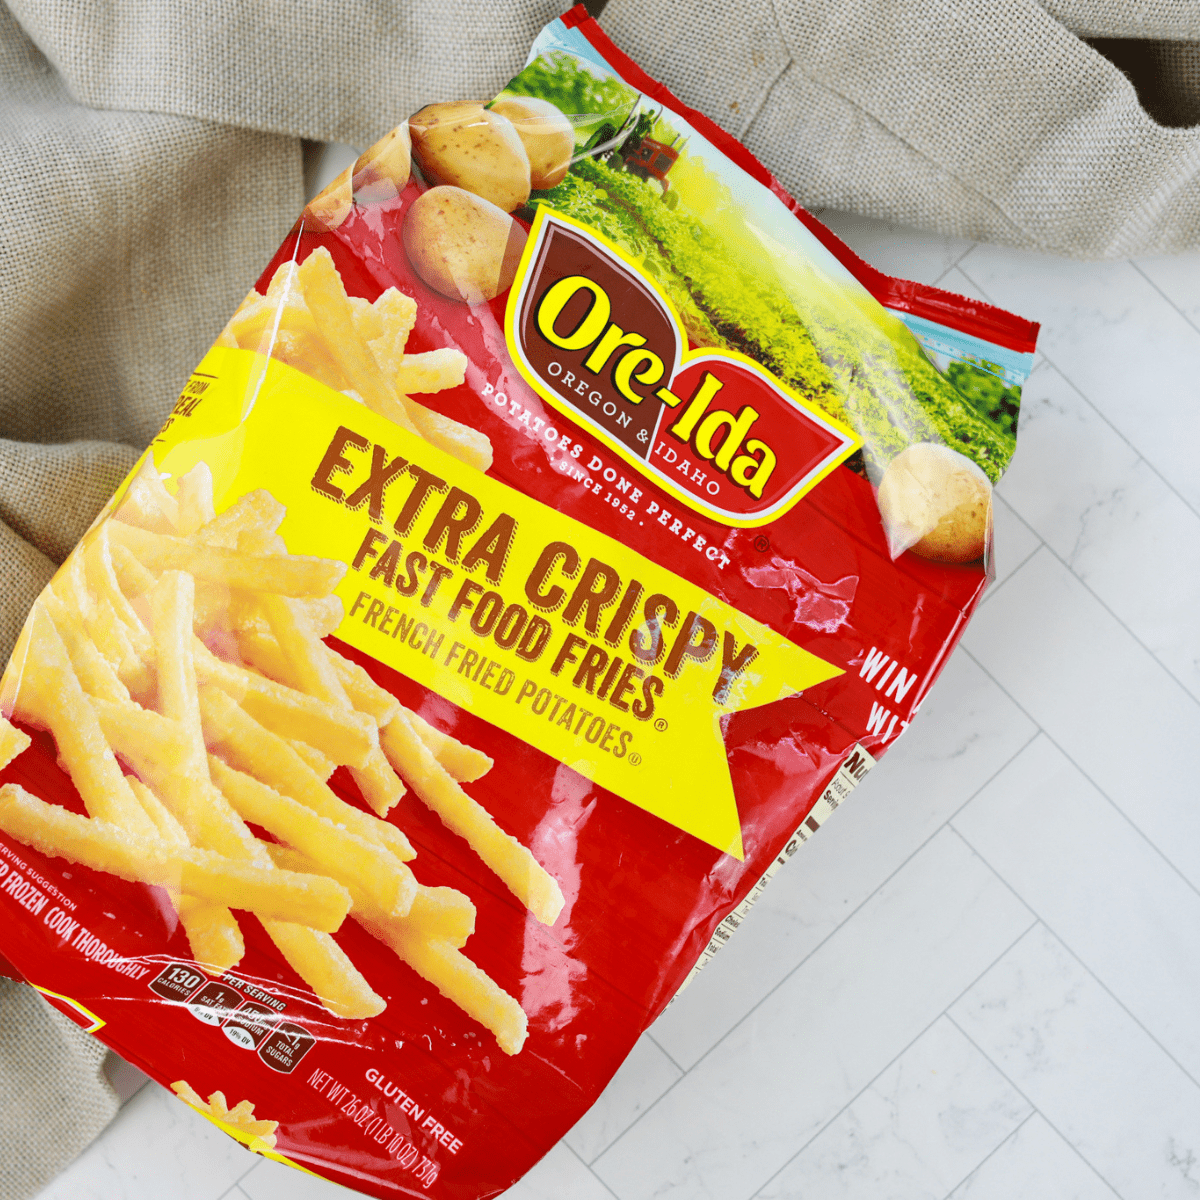 Ore-Ida Frozen Golden French Fries, 5 lb - Fry's Food Stores